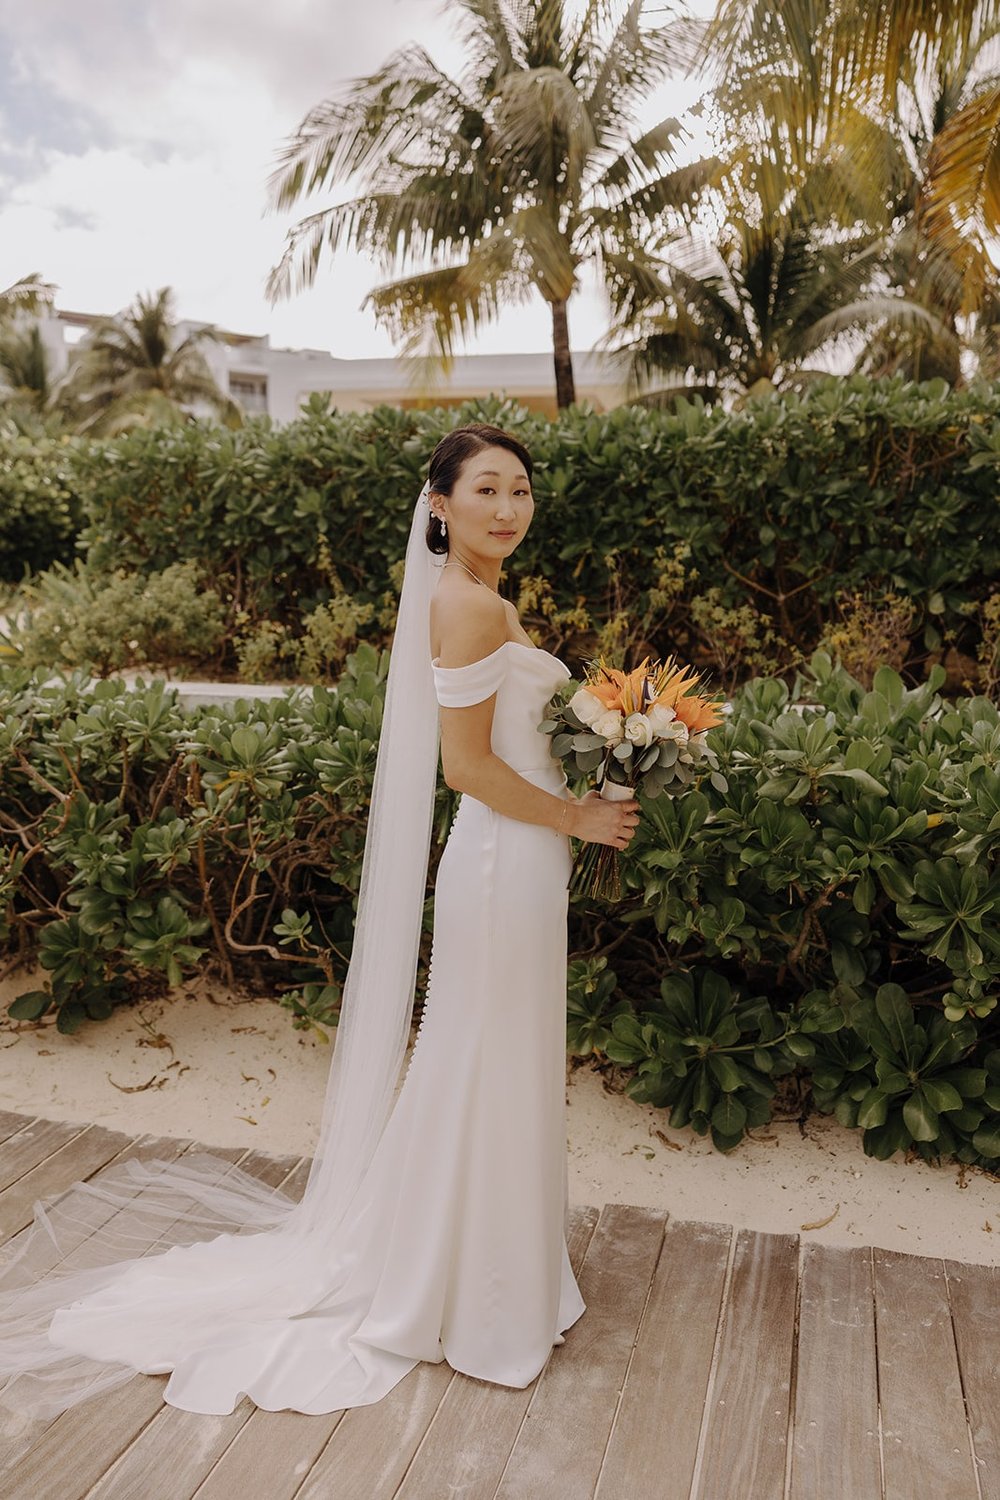 Bride holding orange floral bouquet during her resort wedding in Mexico